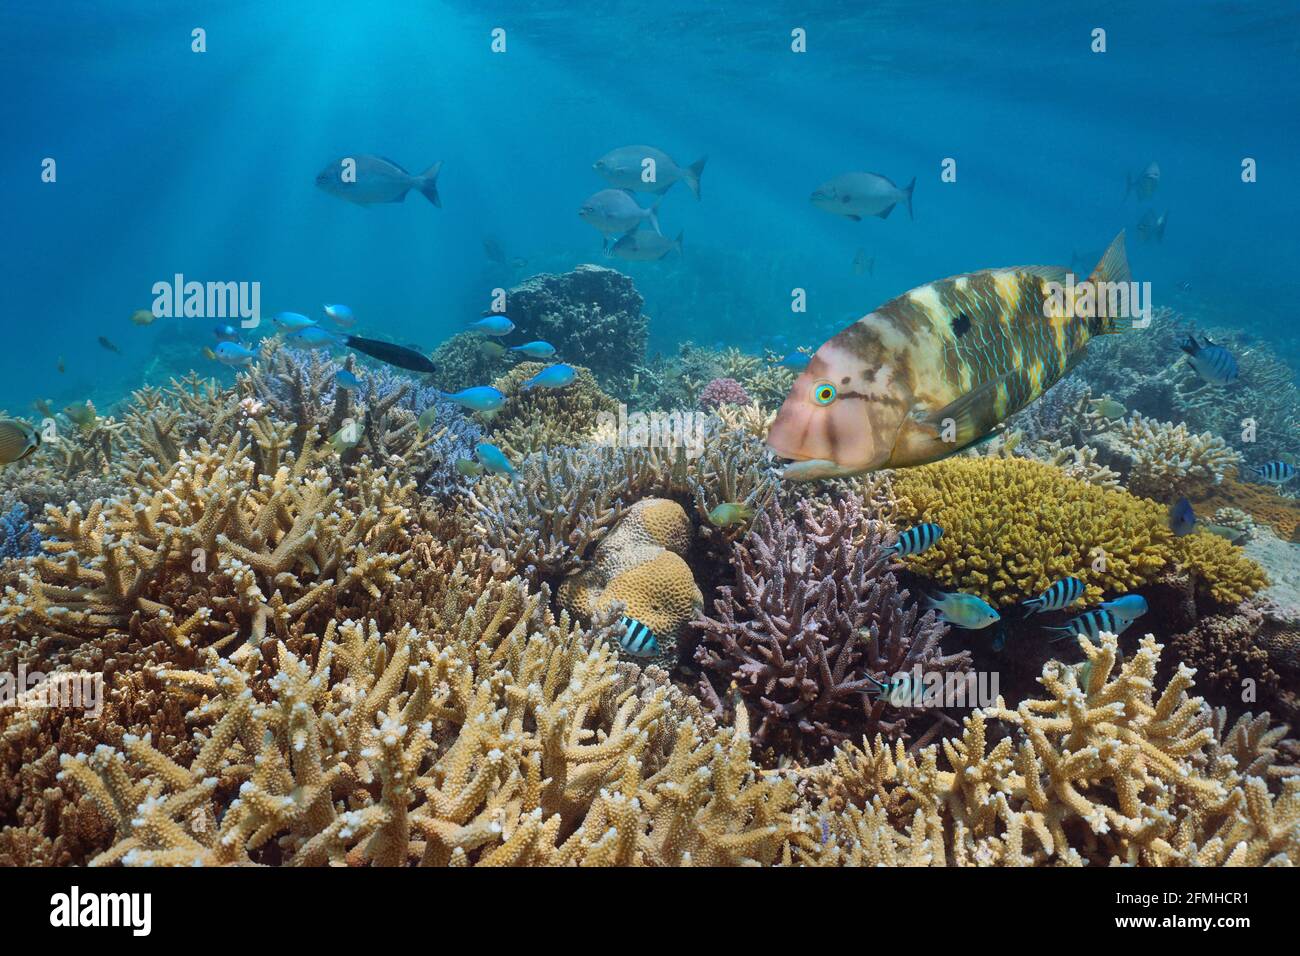 Healthy coral reef with tropical fish in south Pacific ocean, Oceania Stock Photo